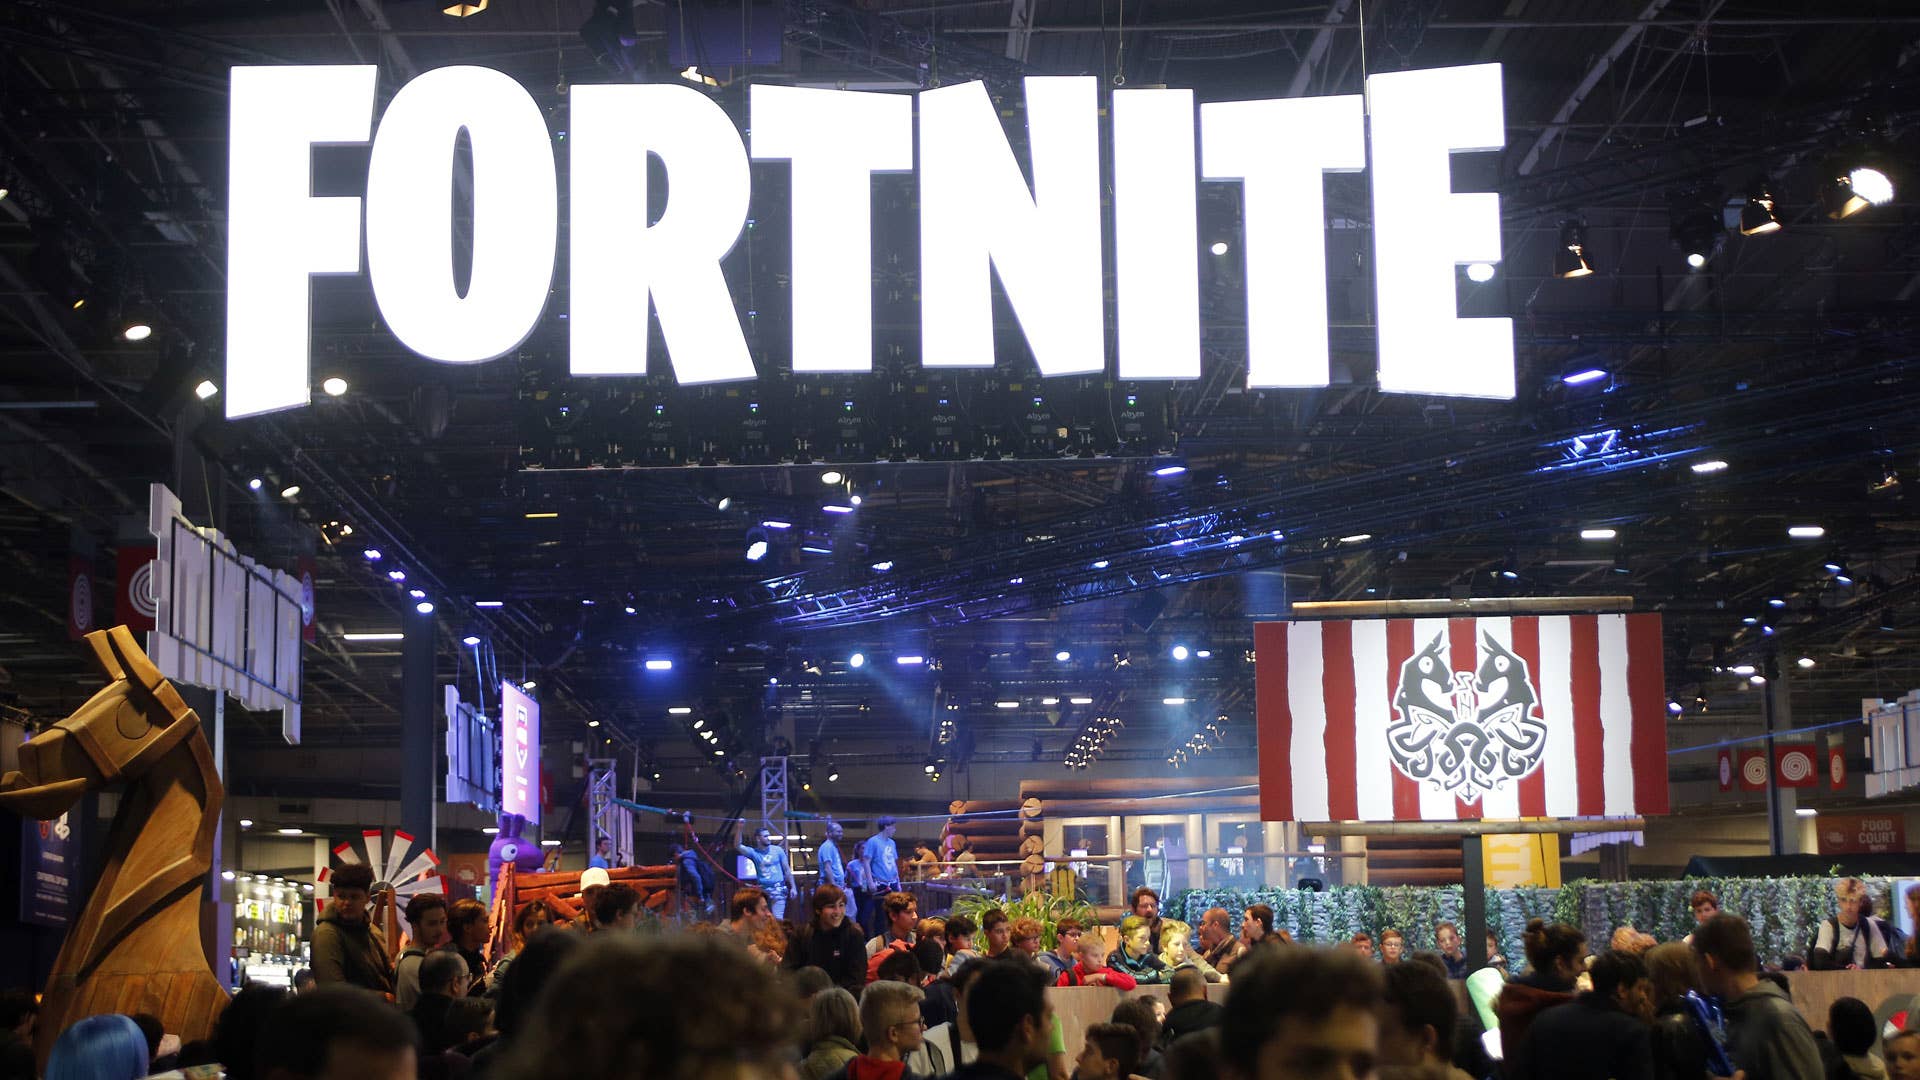 Fortnite booth at '